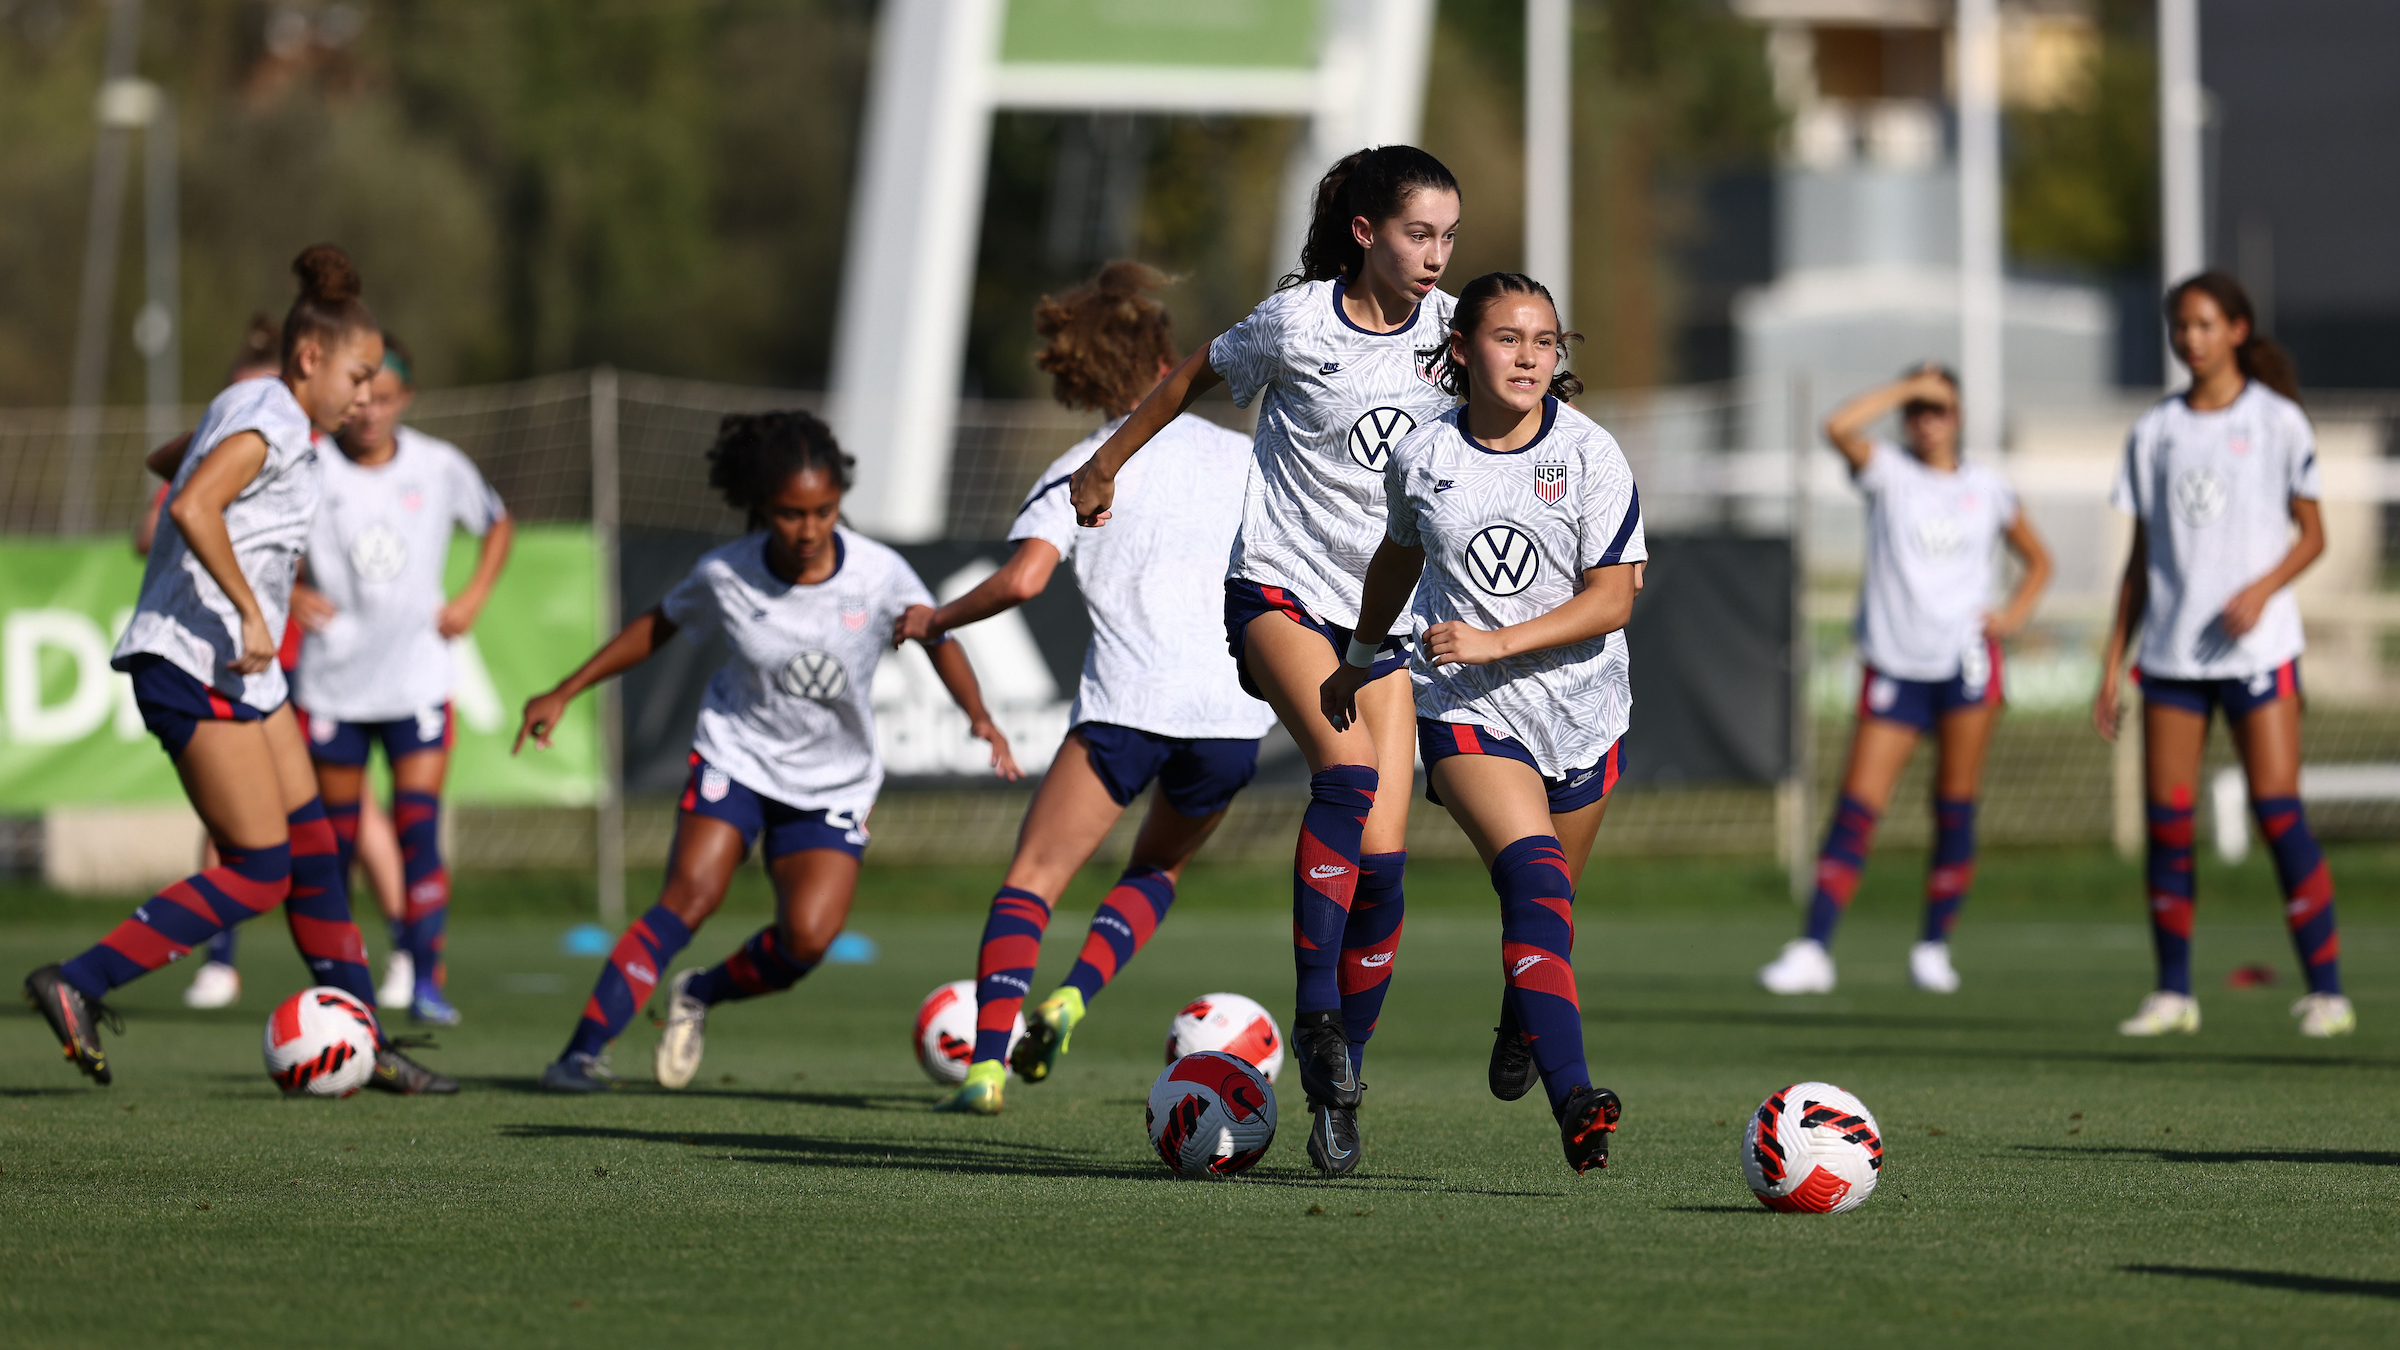 Roster selected for U.S. U17 Women’s Youth National Team's trip to